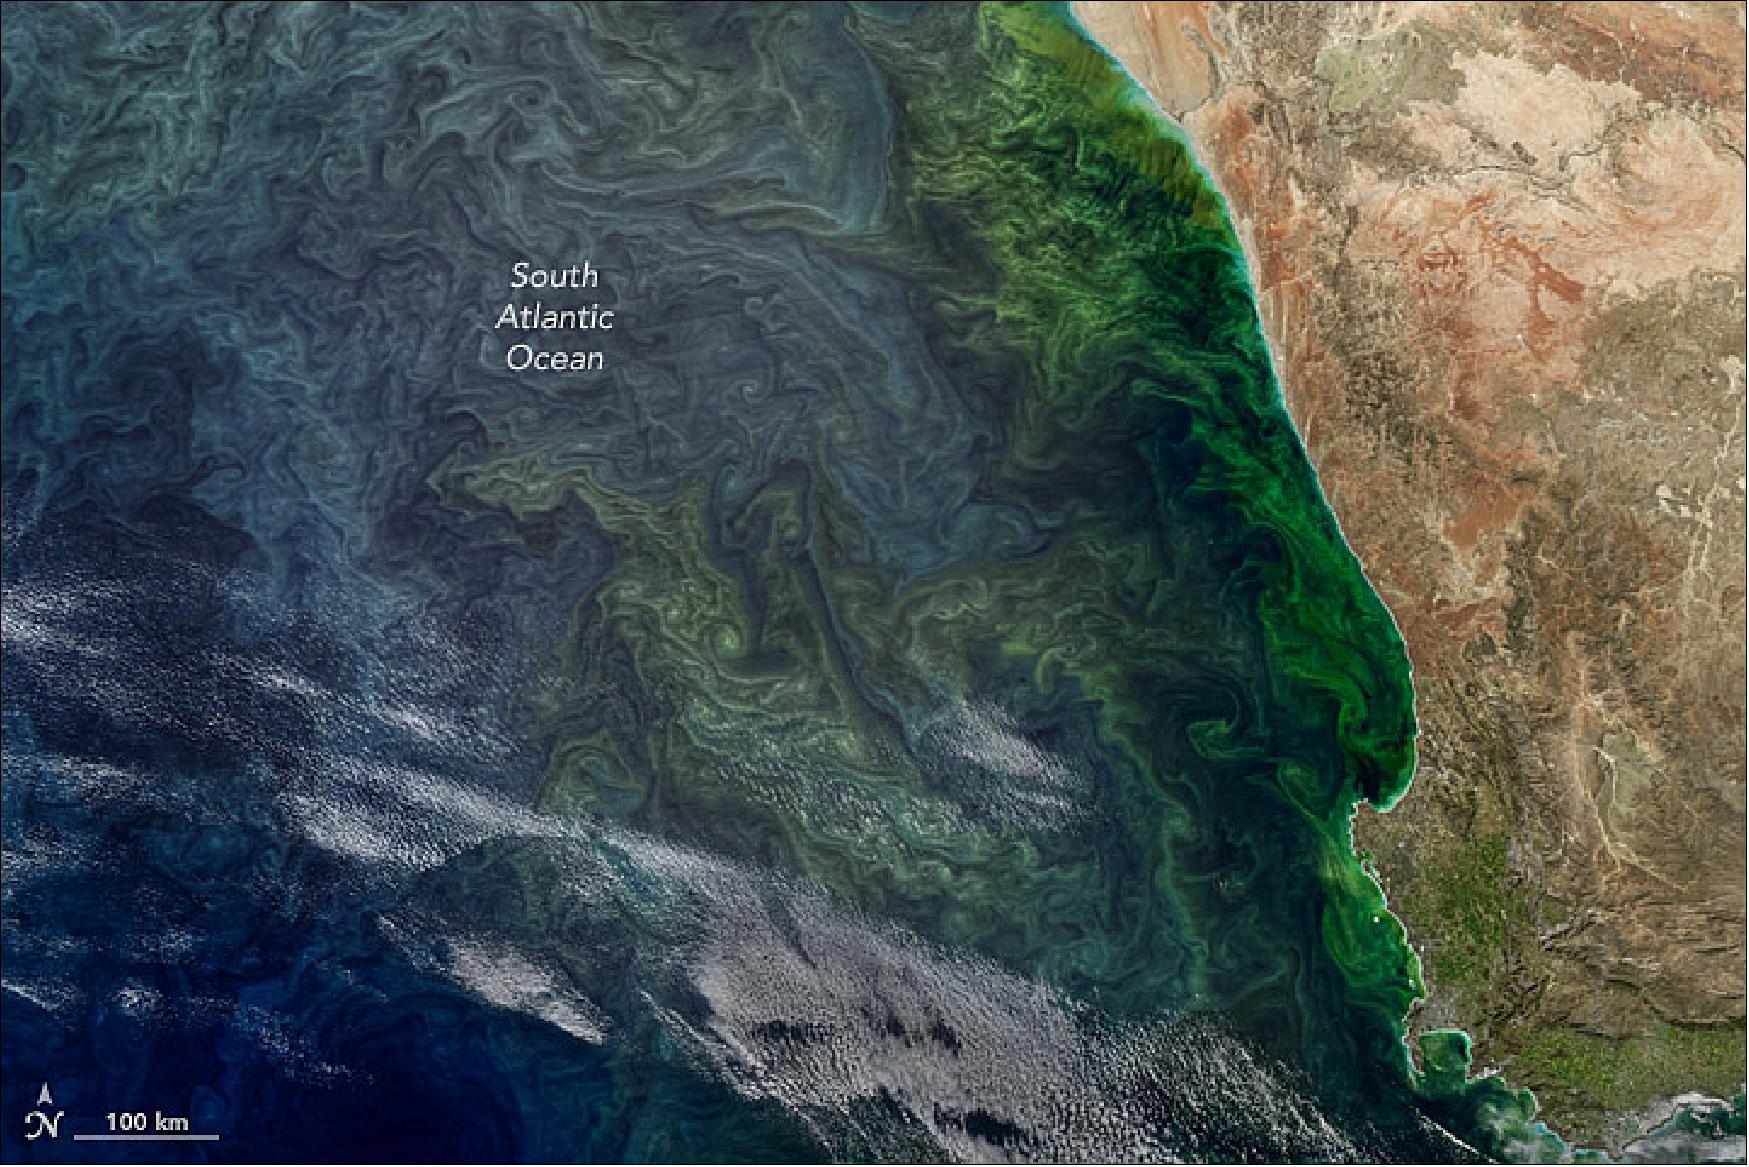 Figure 93: MODIS image of the south-west coast of Africa and the South Atlantic Ocean acquired on 2 September 2017 (image credit: NASA Earth Observatory, images by Jesse Allen, using data from the Level 1 and LAADS (Atmospheres Active Distribution System), and ocean imagery by Norman Kuring, NASA’s Ocean Color web, story by Mike Carlowicz)